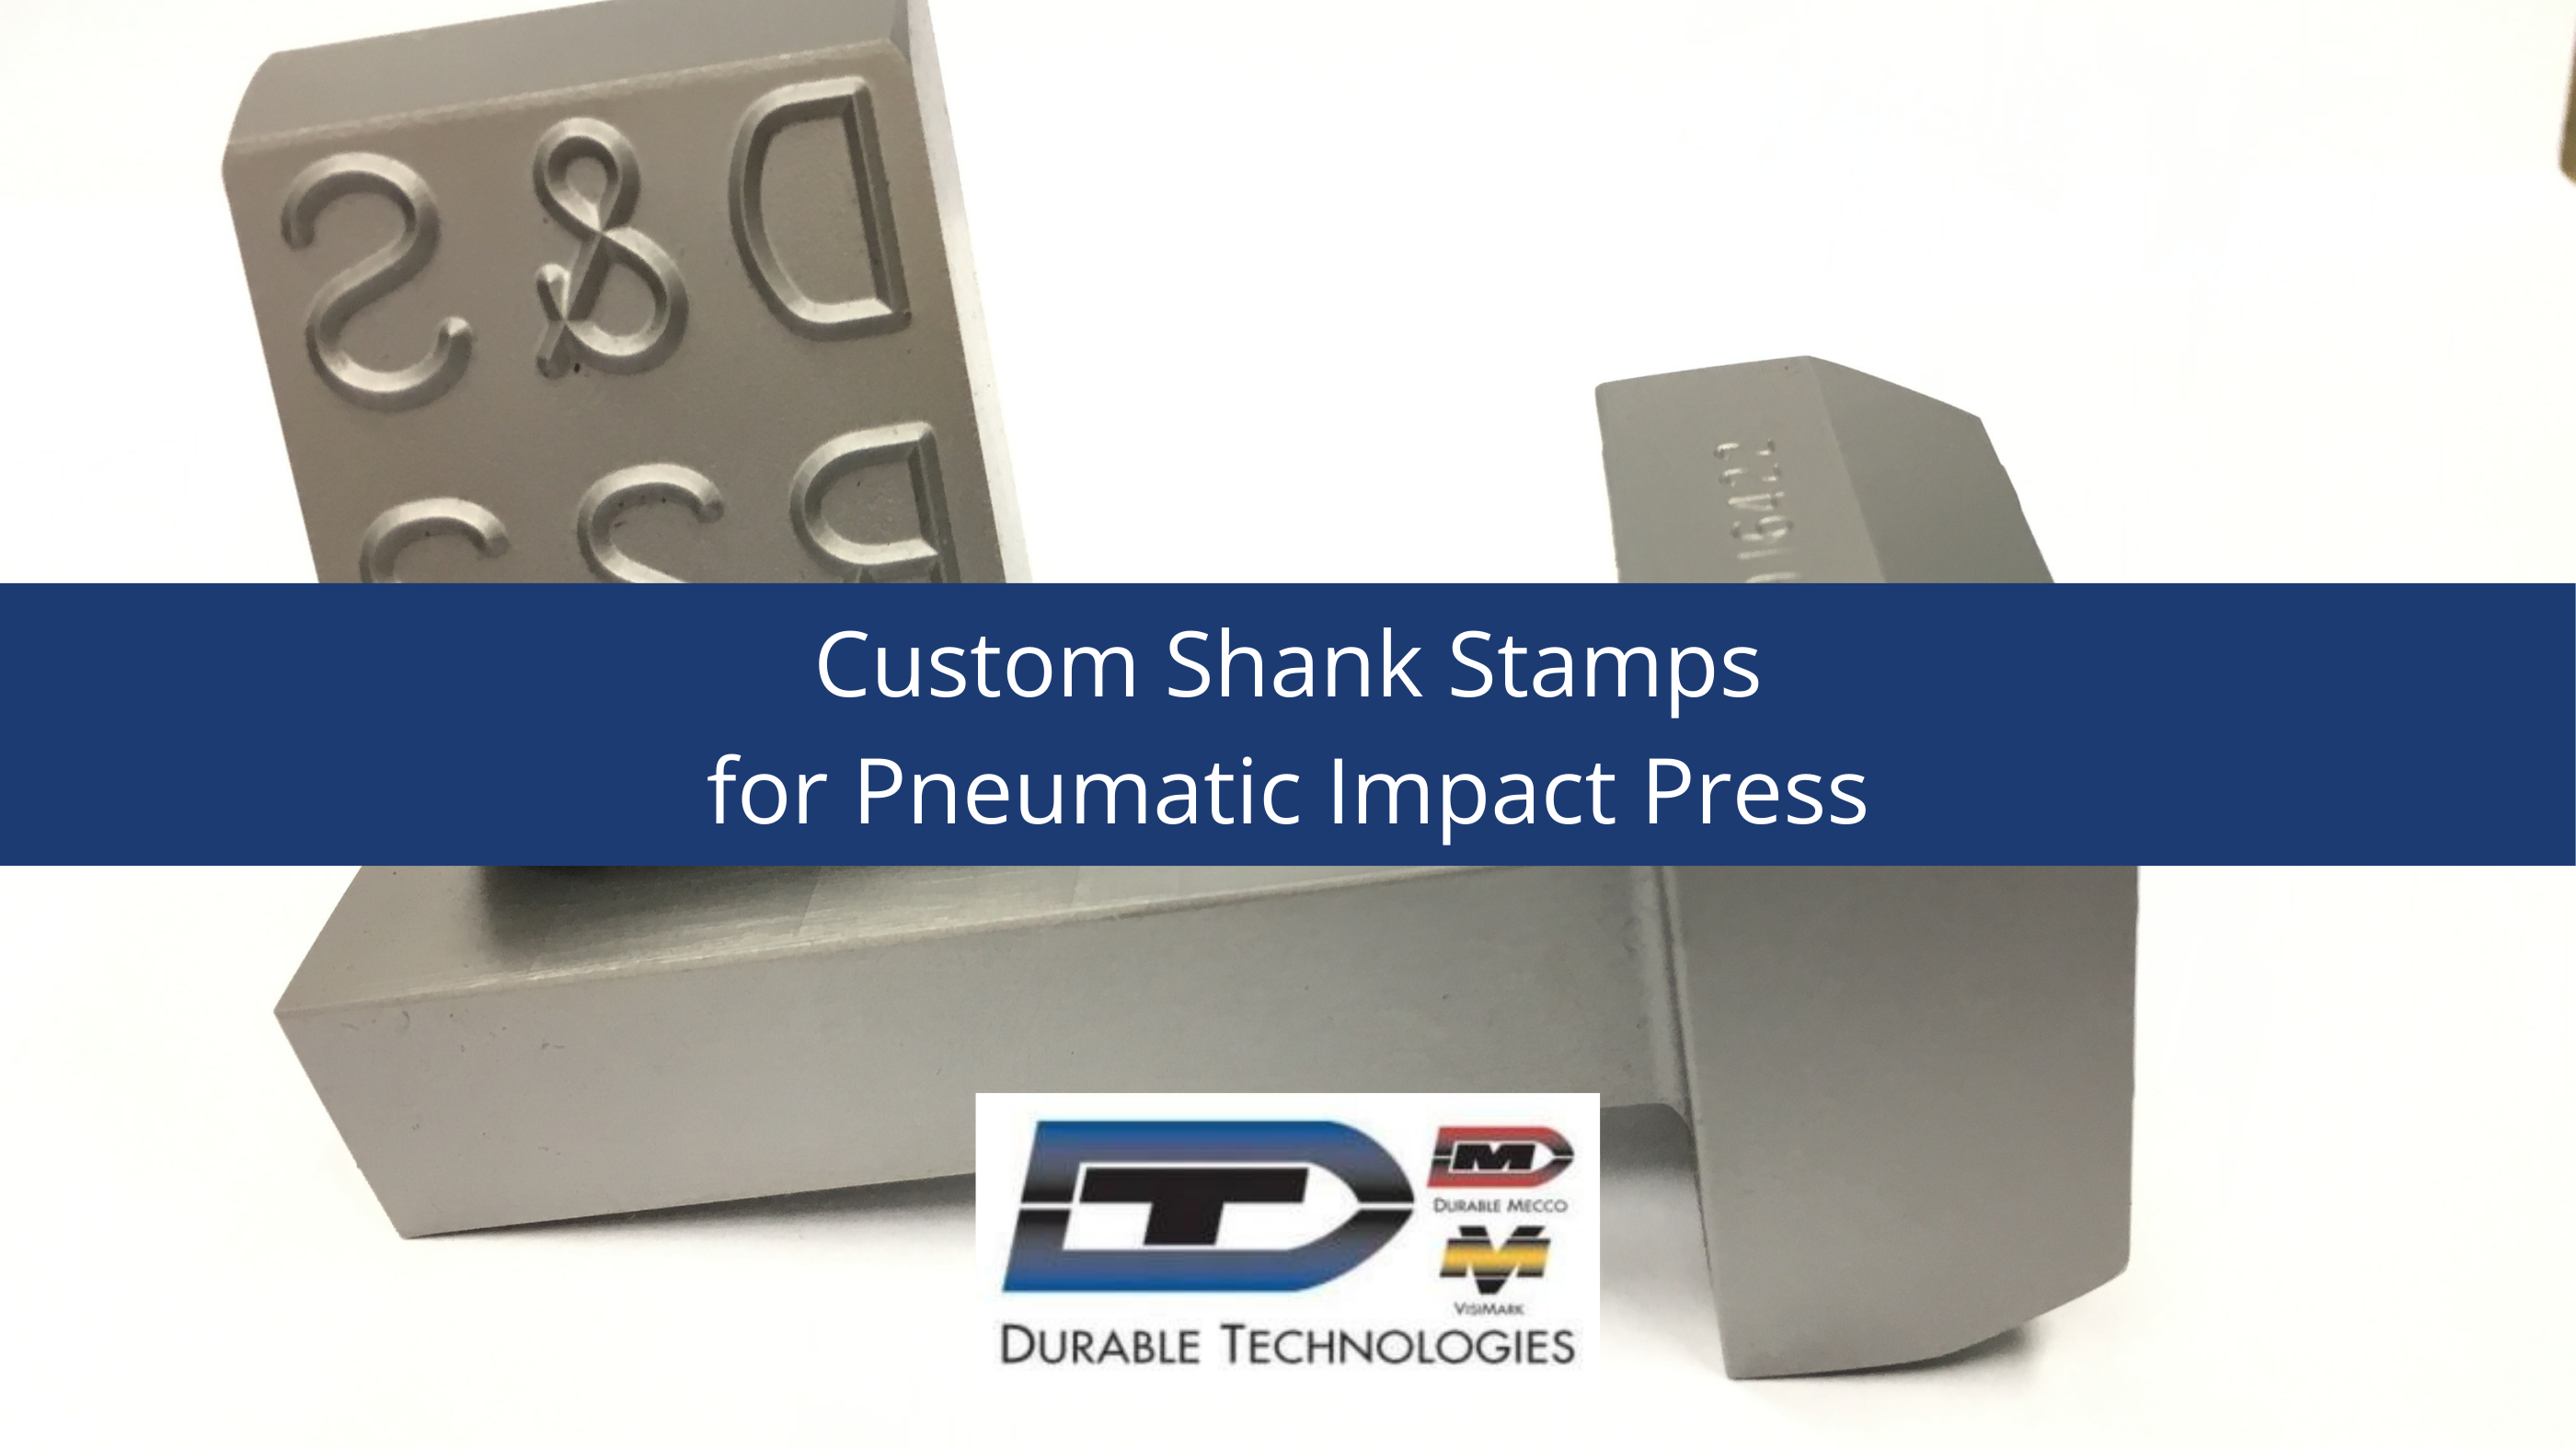 Custom Shank Stamps for Pneumatic Impact Press